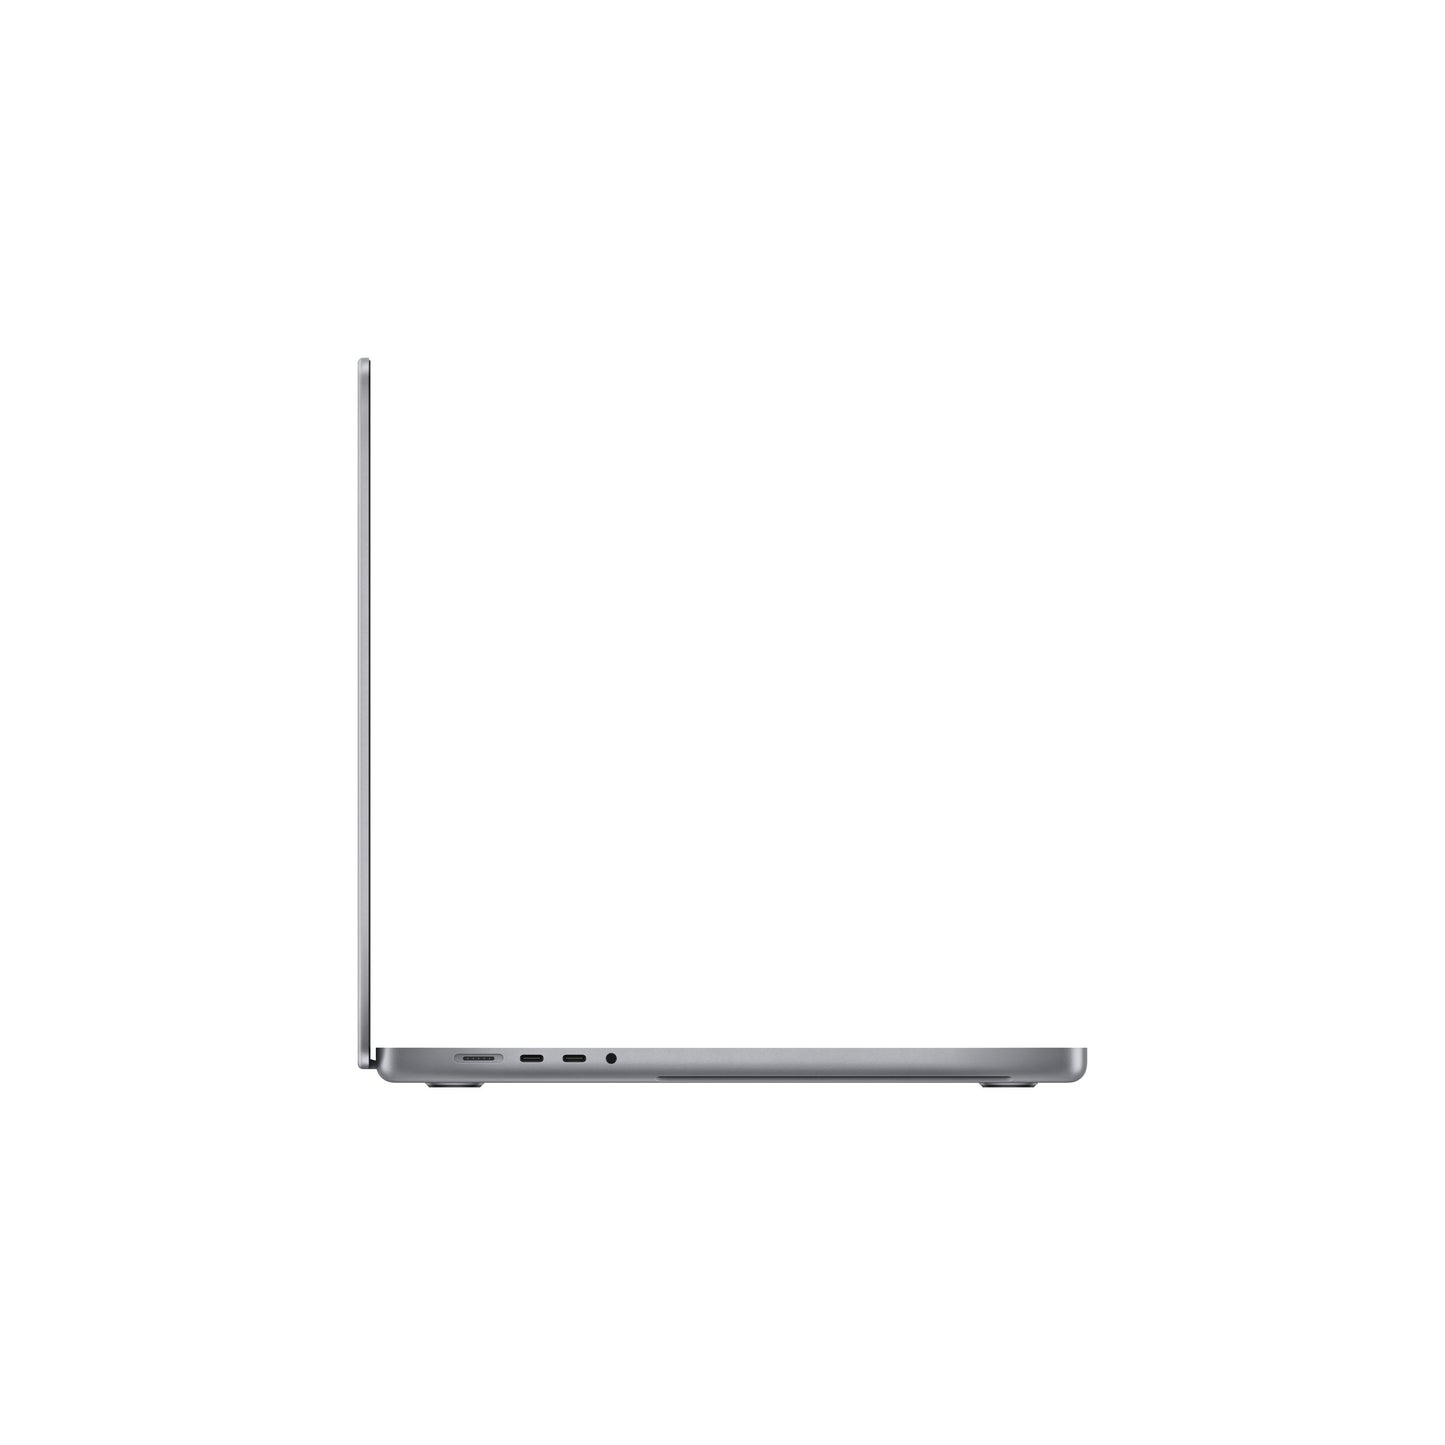 16-inch MacBook Pro: Apple M1 Pro chip with 10?core CPU and 16?core GPU, 1TB SSD - Space Grey